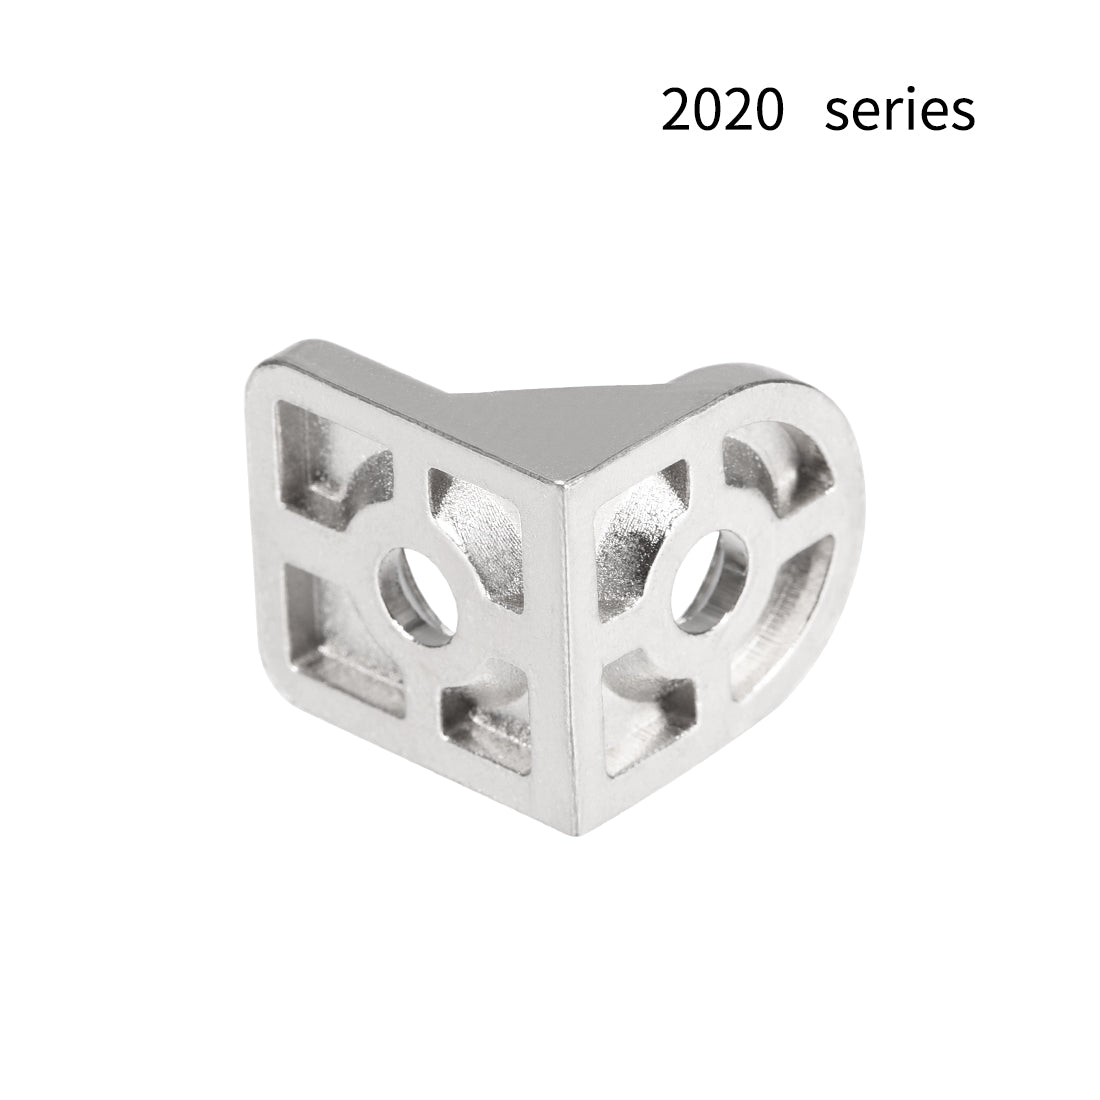 uxcell Uxcell Angle Arbitrary Bracket Set, Corner L Connector for 2020 Series Aluminum Extrusion Profile with Slot 6mm, 6 Pcs